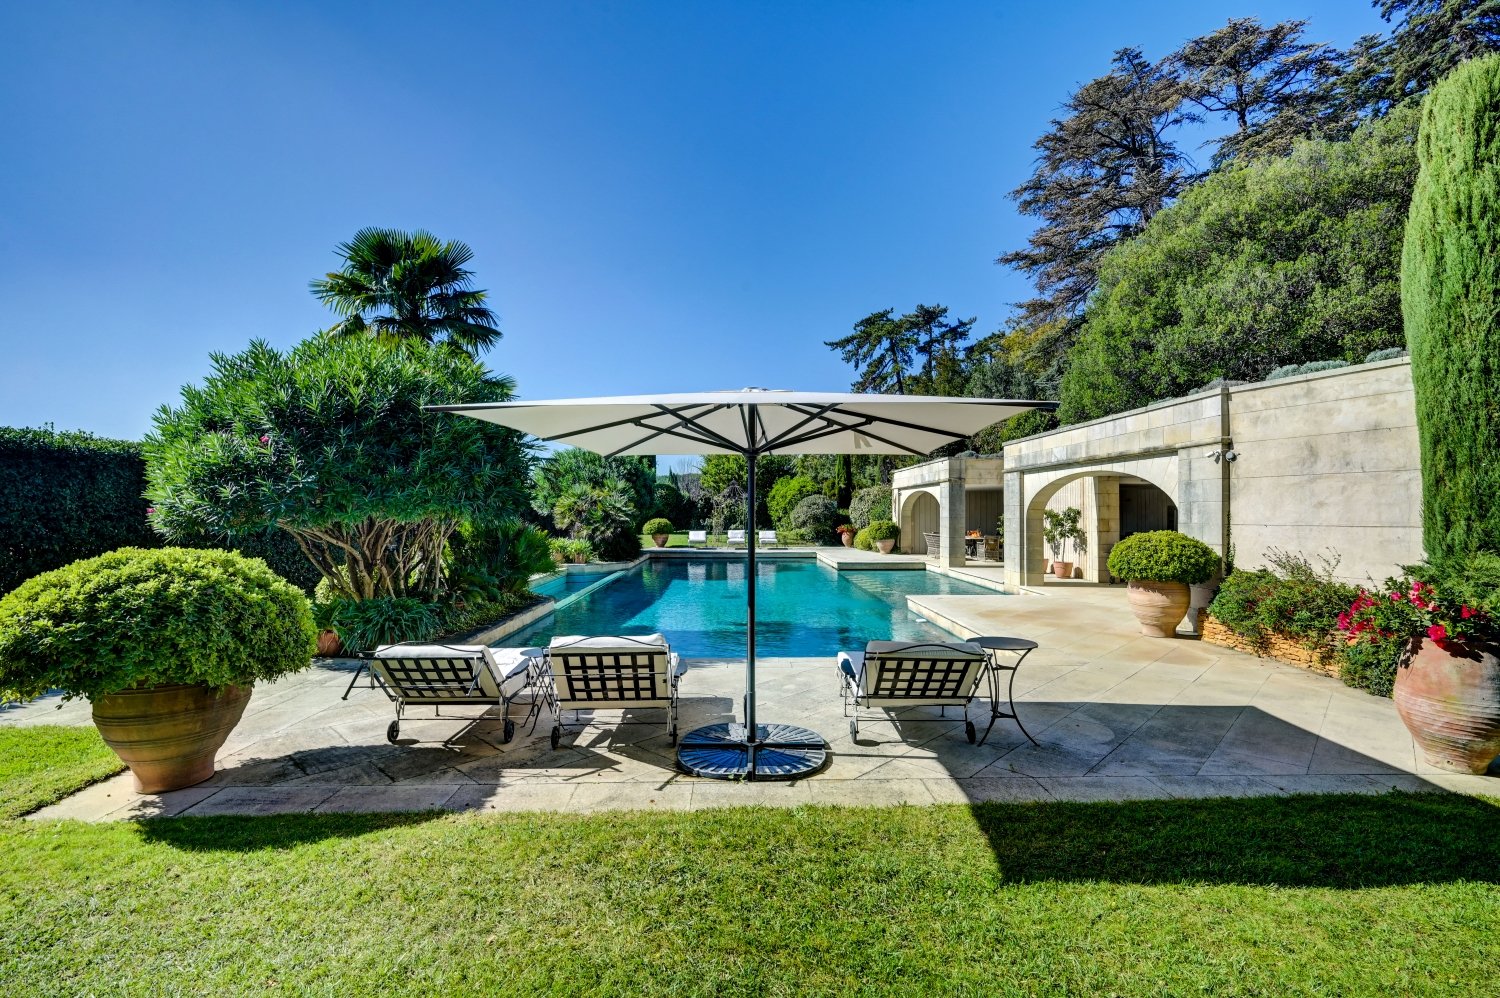 Luxury chateau with swimming pool for seminars in Provence, south of France